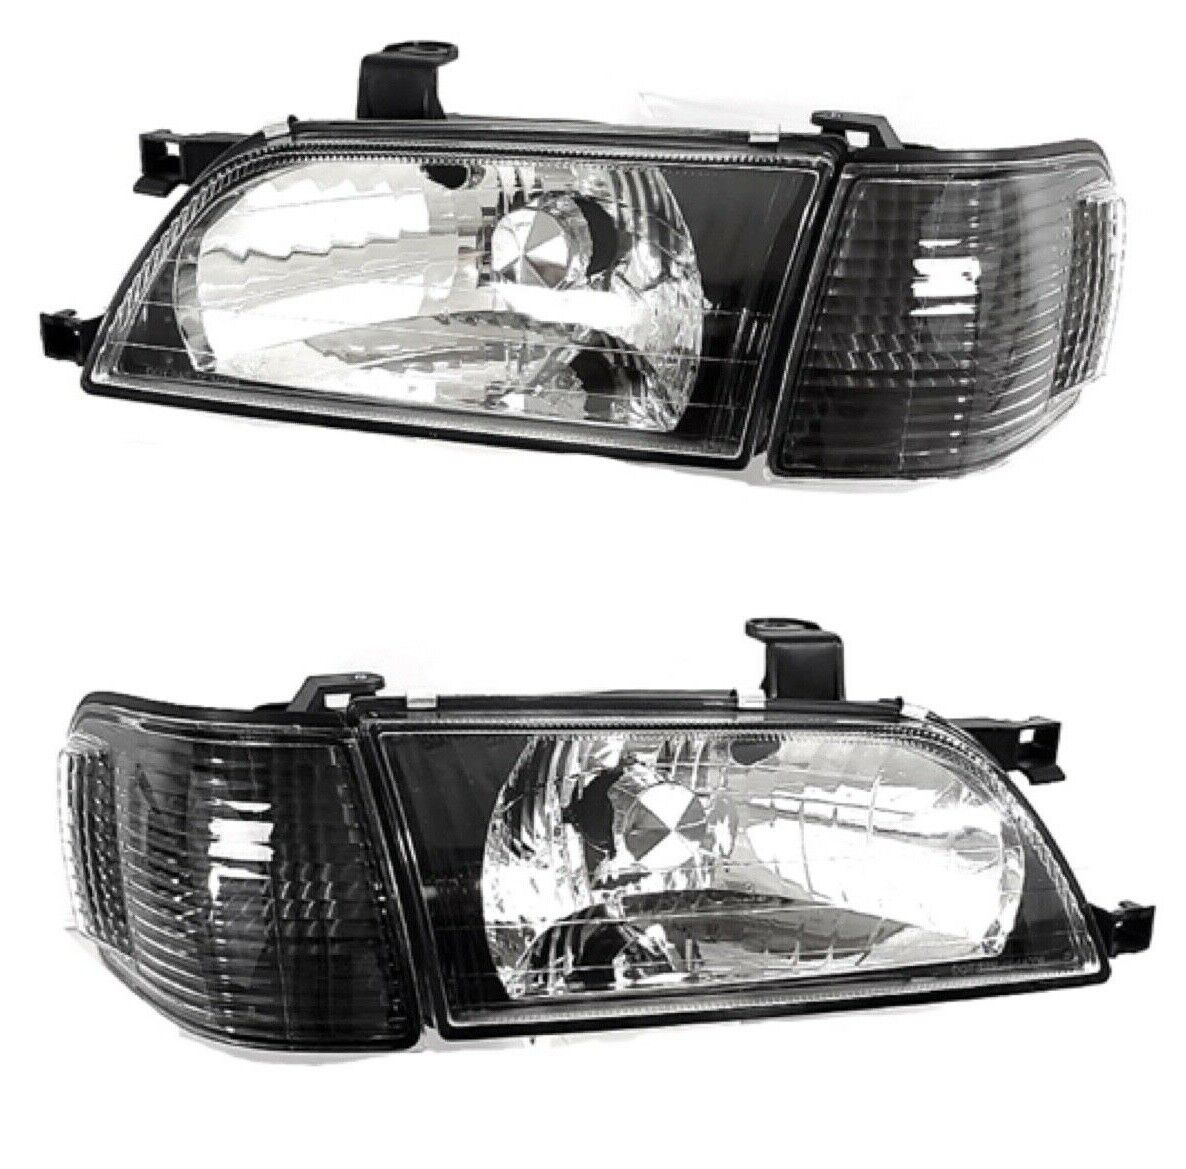 Fit For 97 99 Toyota Tercel JDM Chrome Crystal Headlights Lamps LH RH